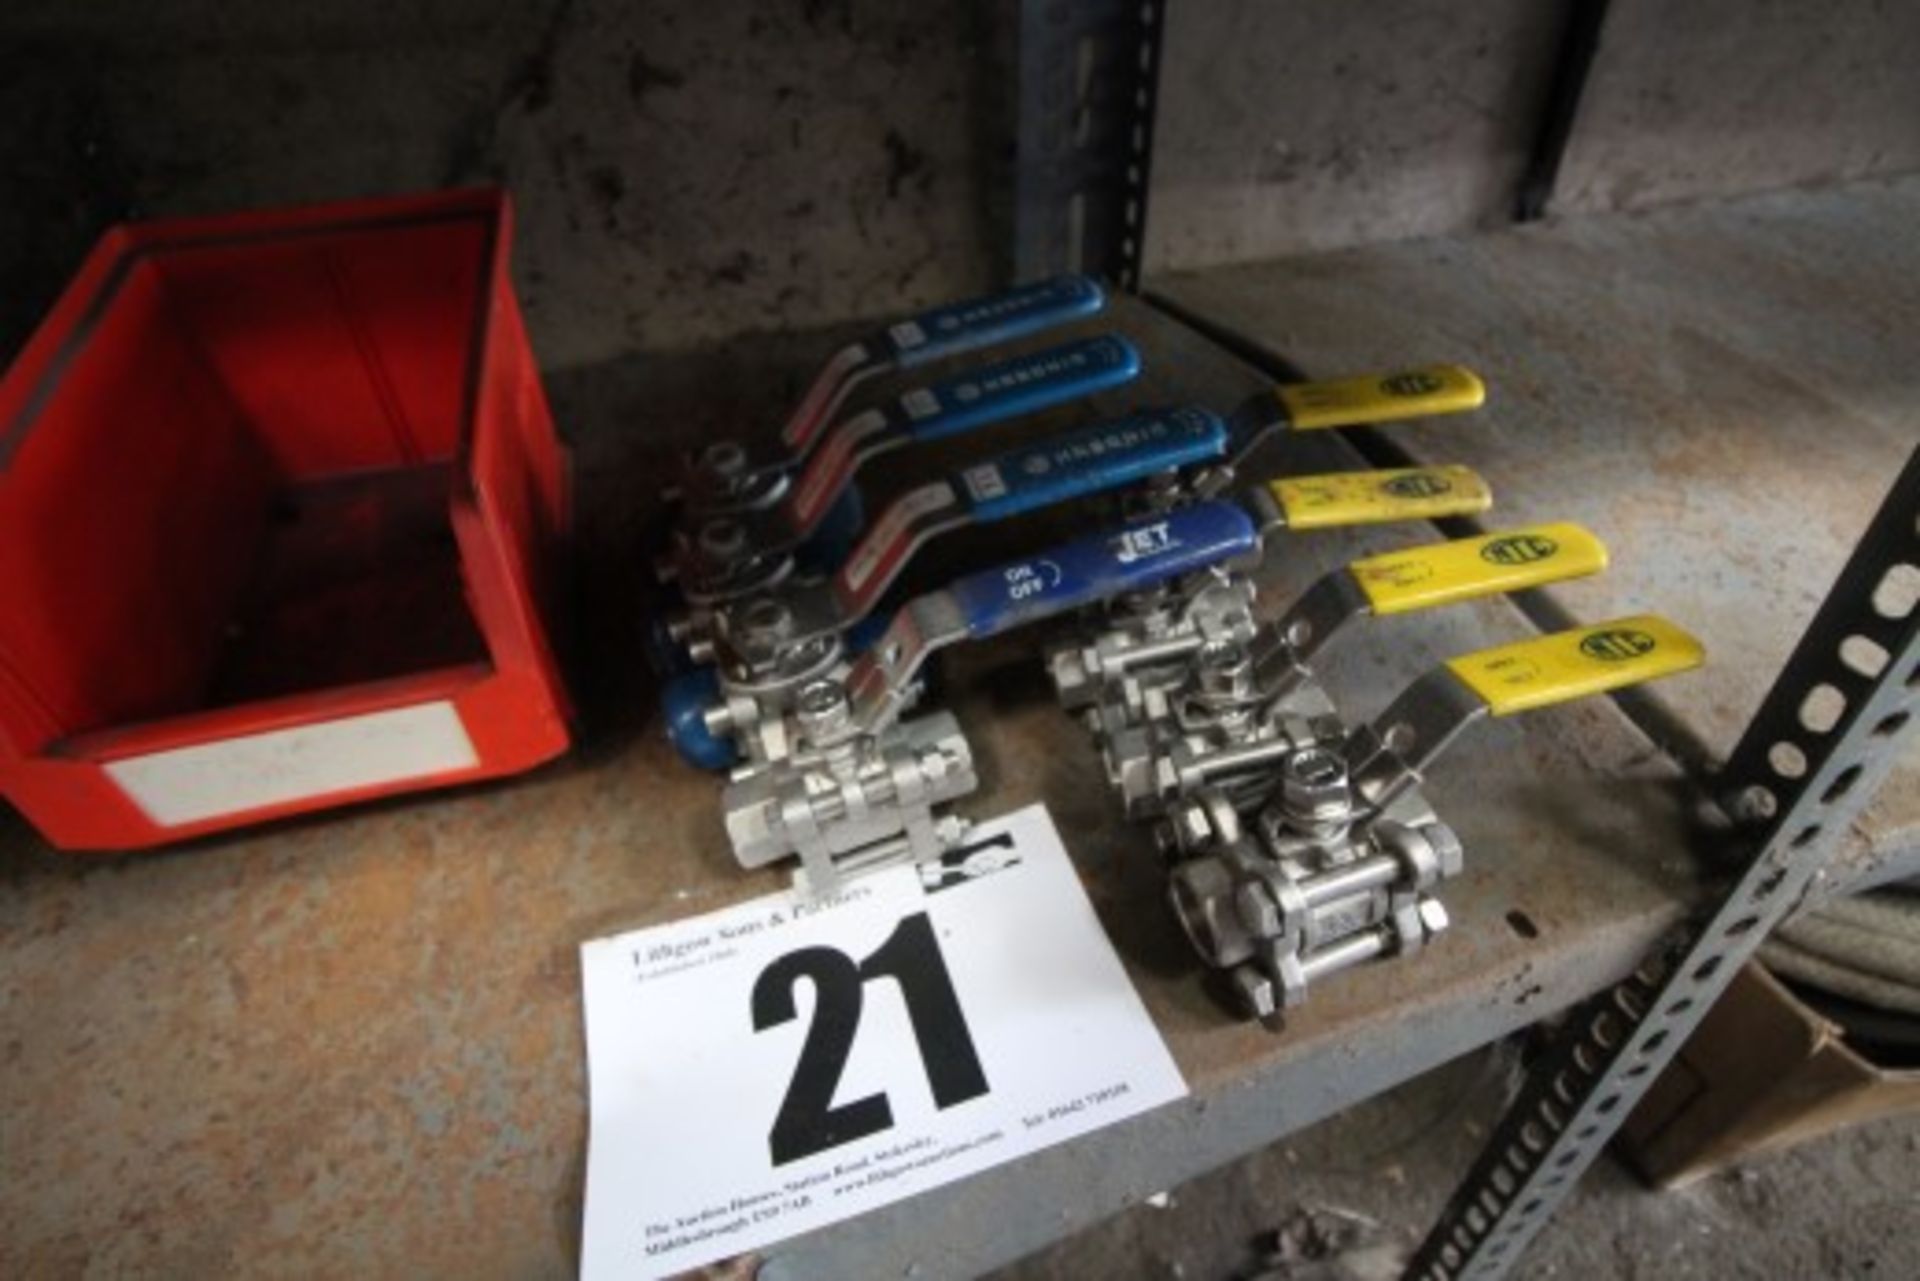 8x Stainless Steel, Approximately 1/2" Ball Valves (4x with Blue Handles, and 4x with Yellow